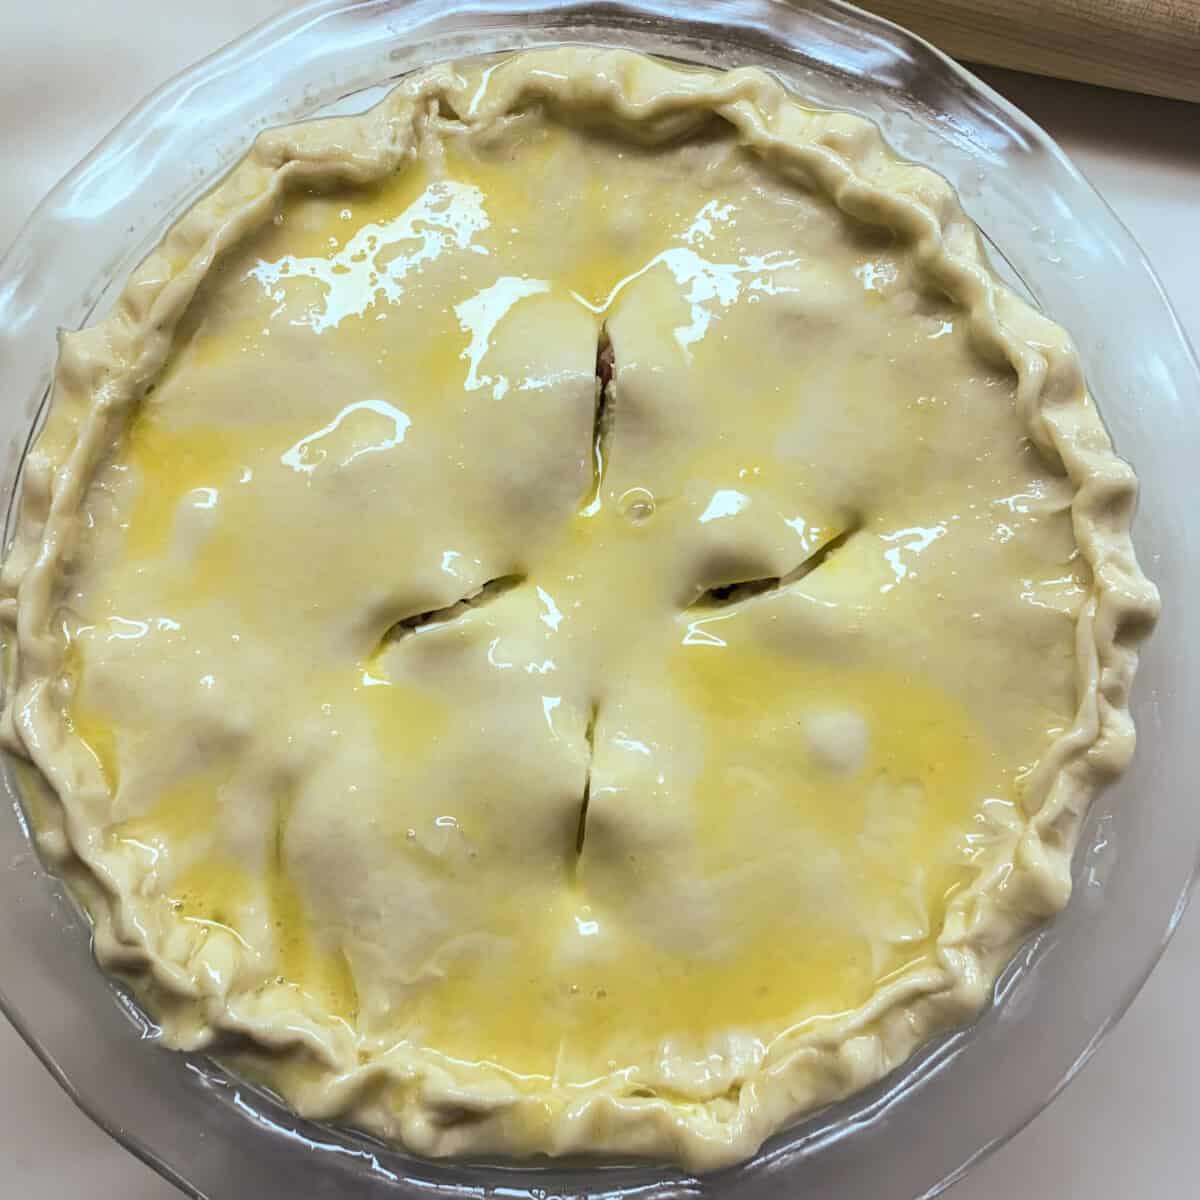 unbaked pie with vent slits